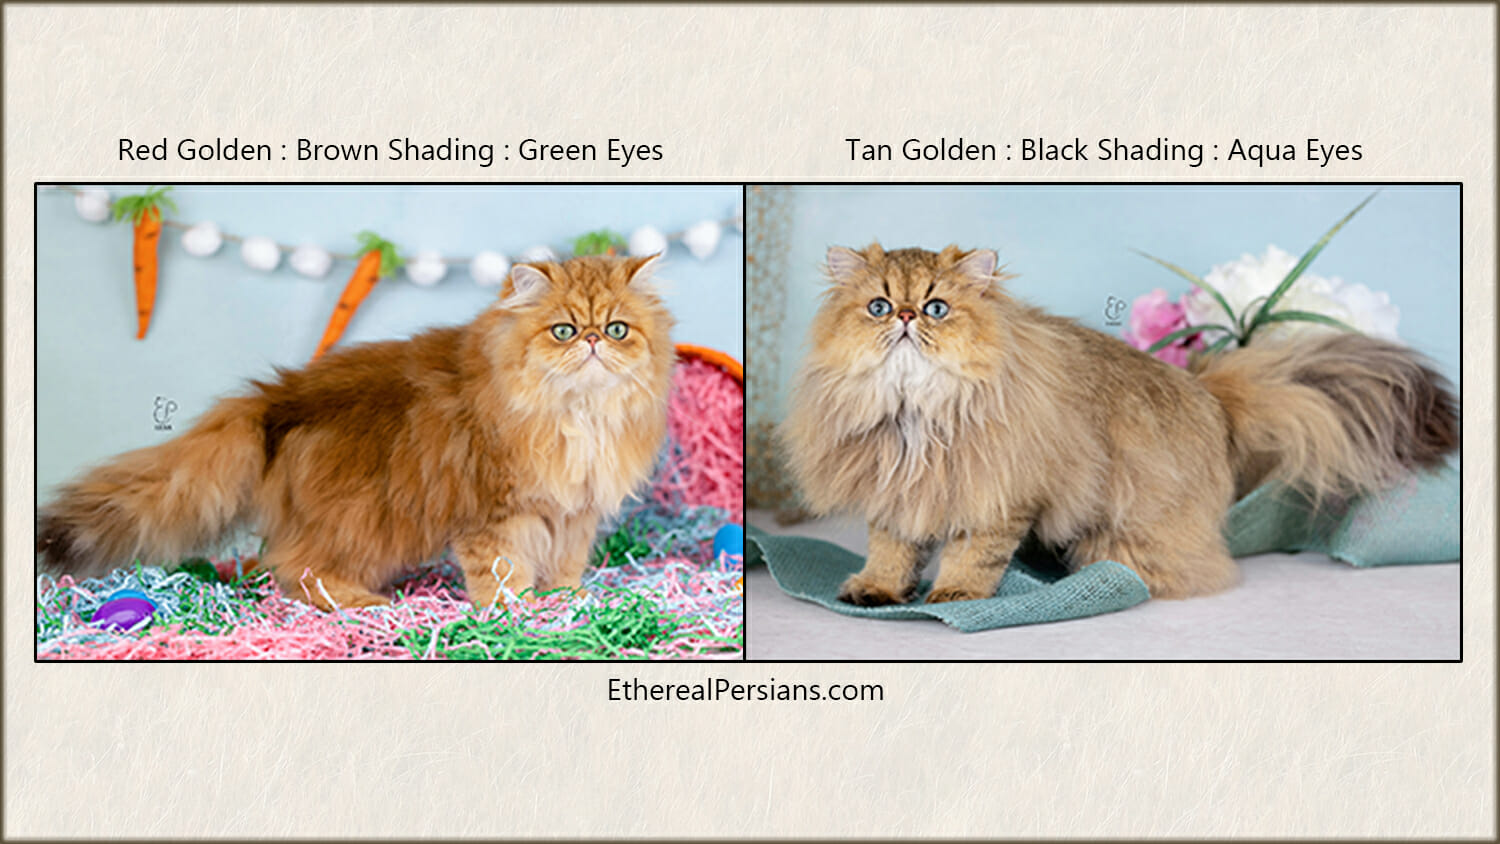 Red golden with brown shading and green eyes compared to a tan golden with black shading and aqua eyes